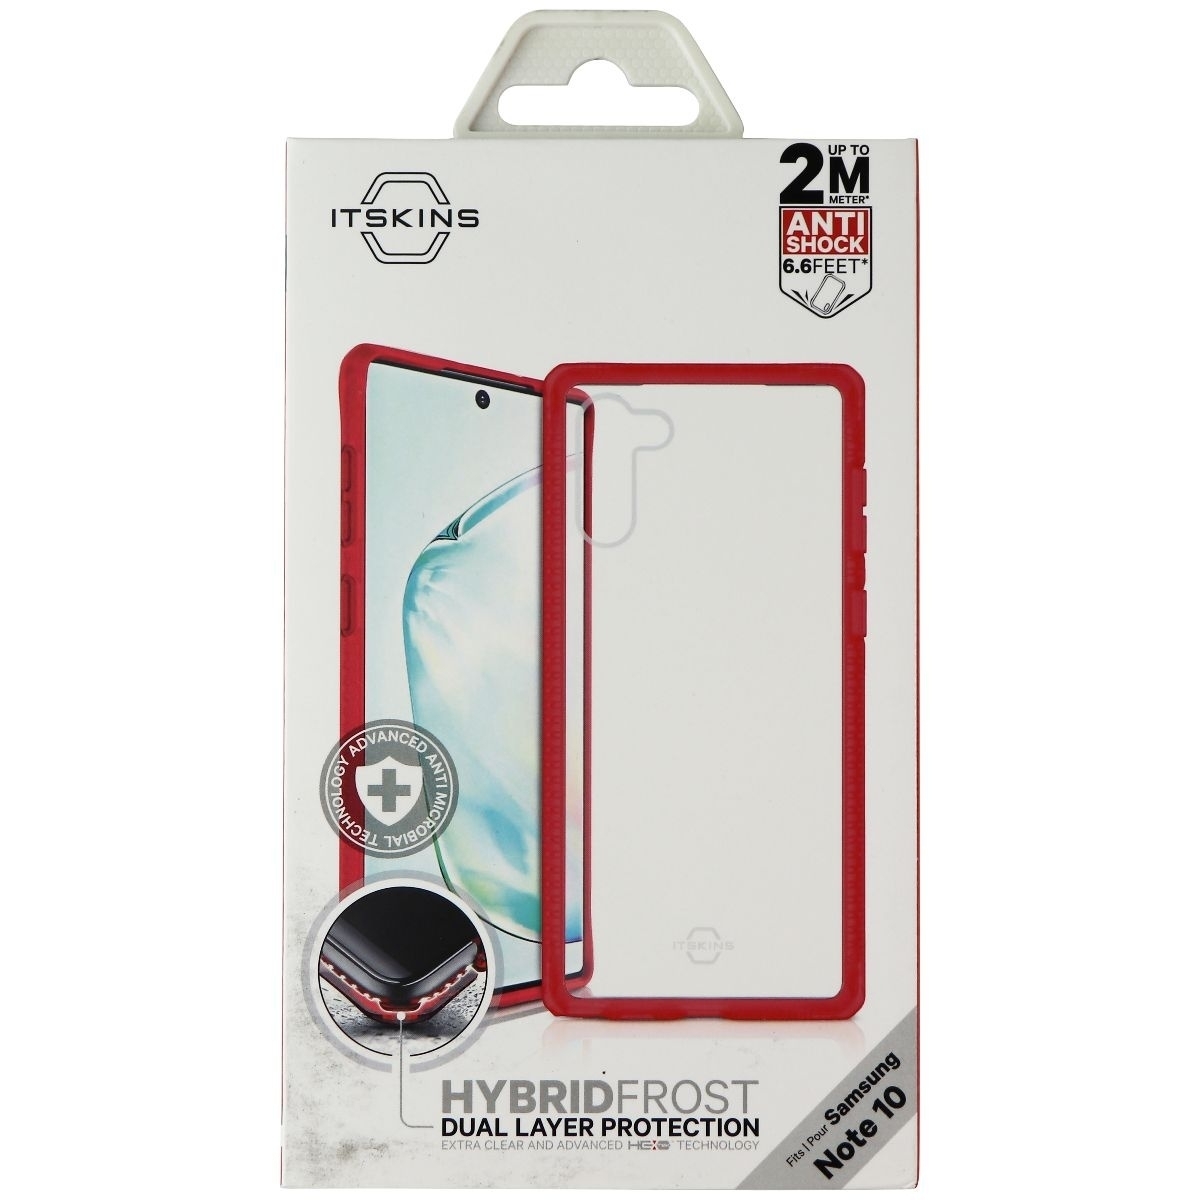 ITSKINS Hybrid Frost Dual Layer Case For Samsung Galaxy Note10 - Red/Clear